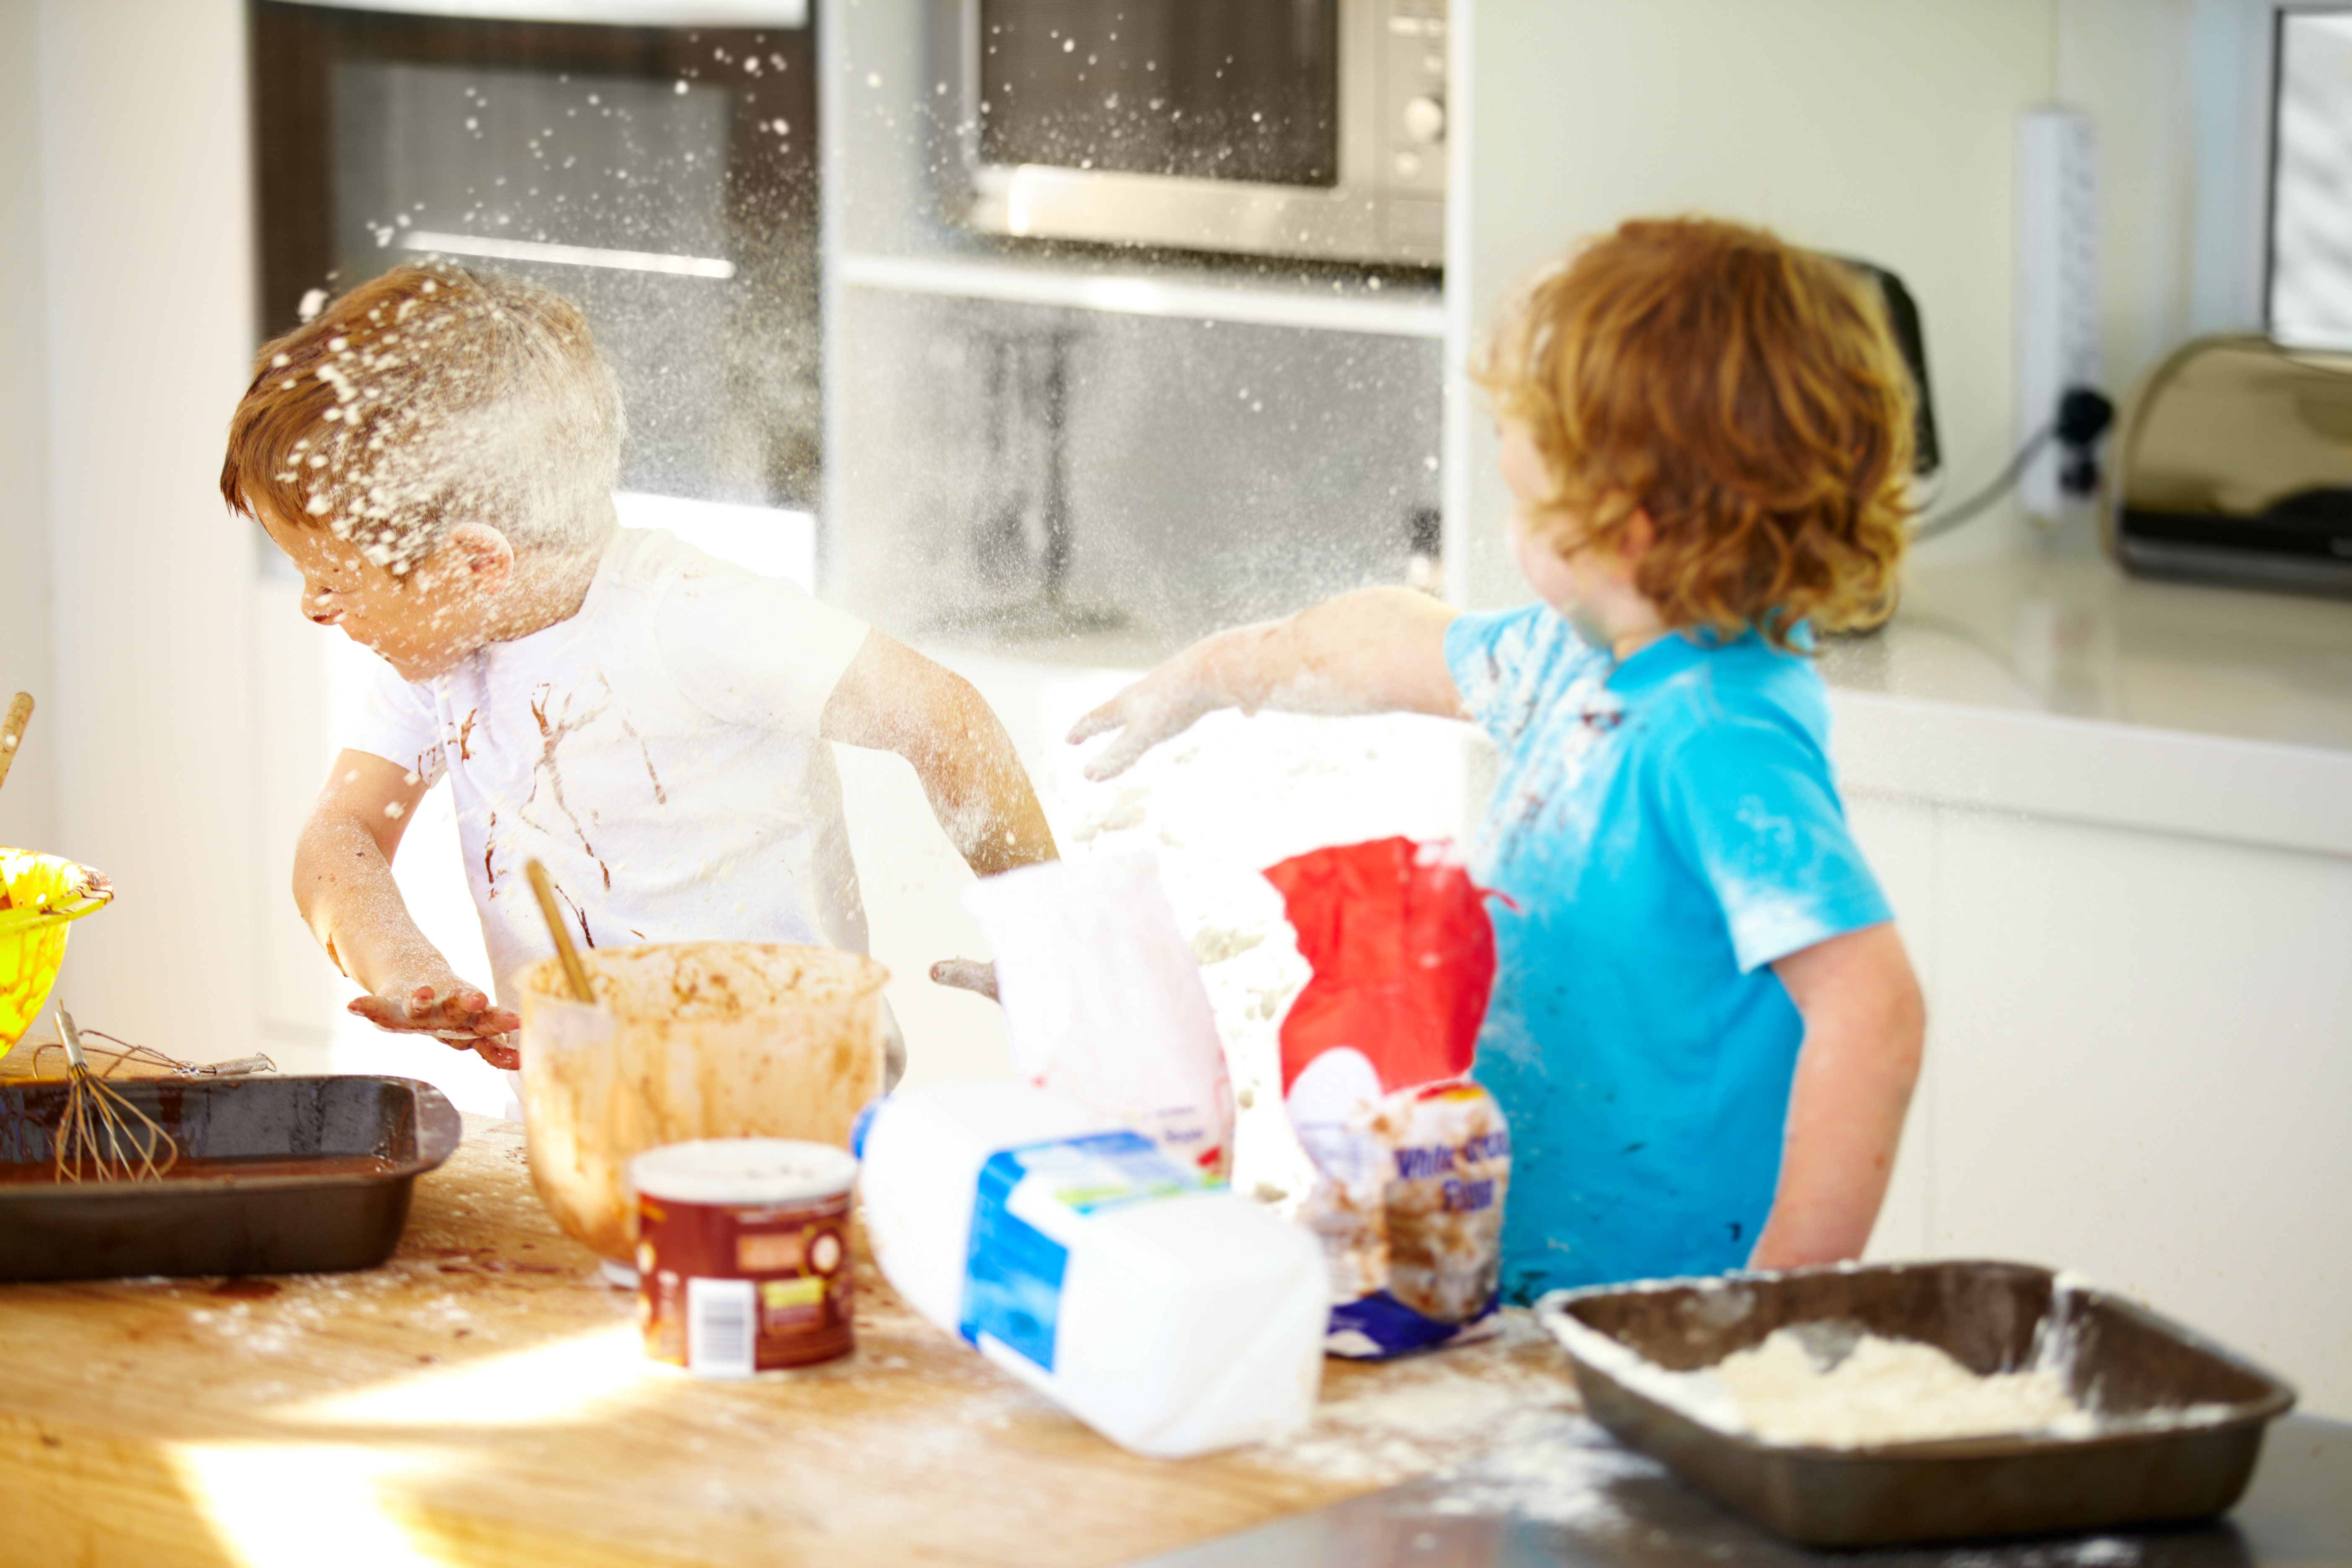 Baking has always been a no-go zone for Becca and her kids too